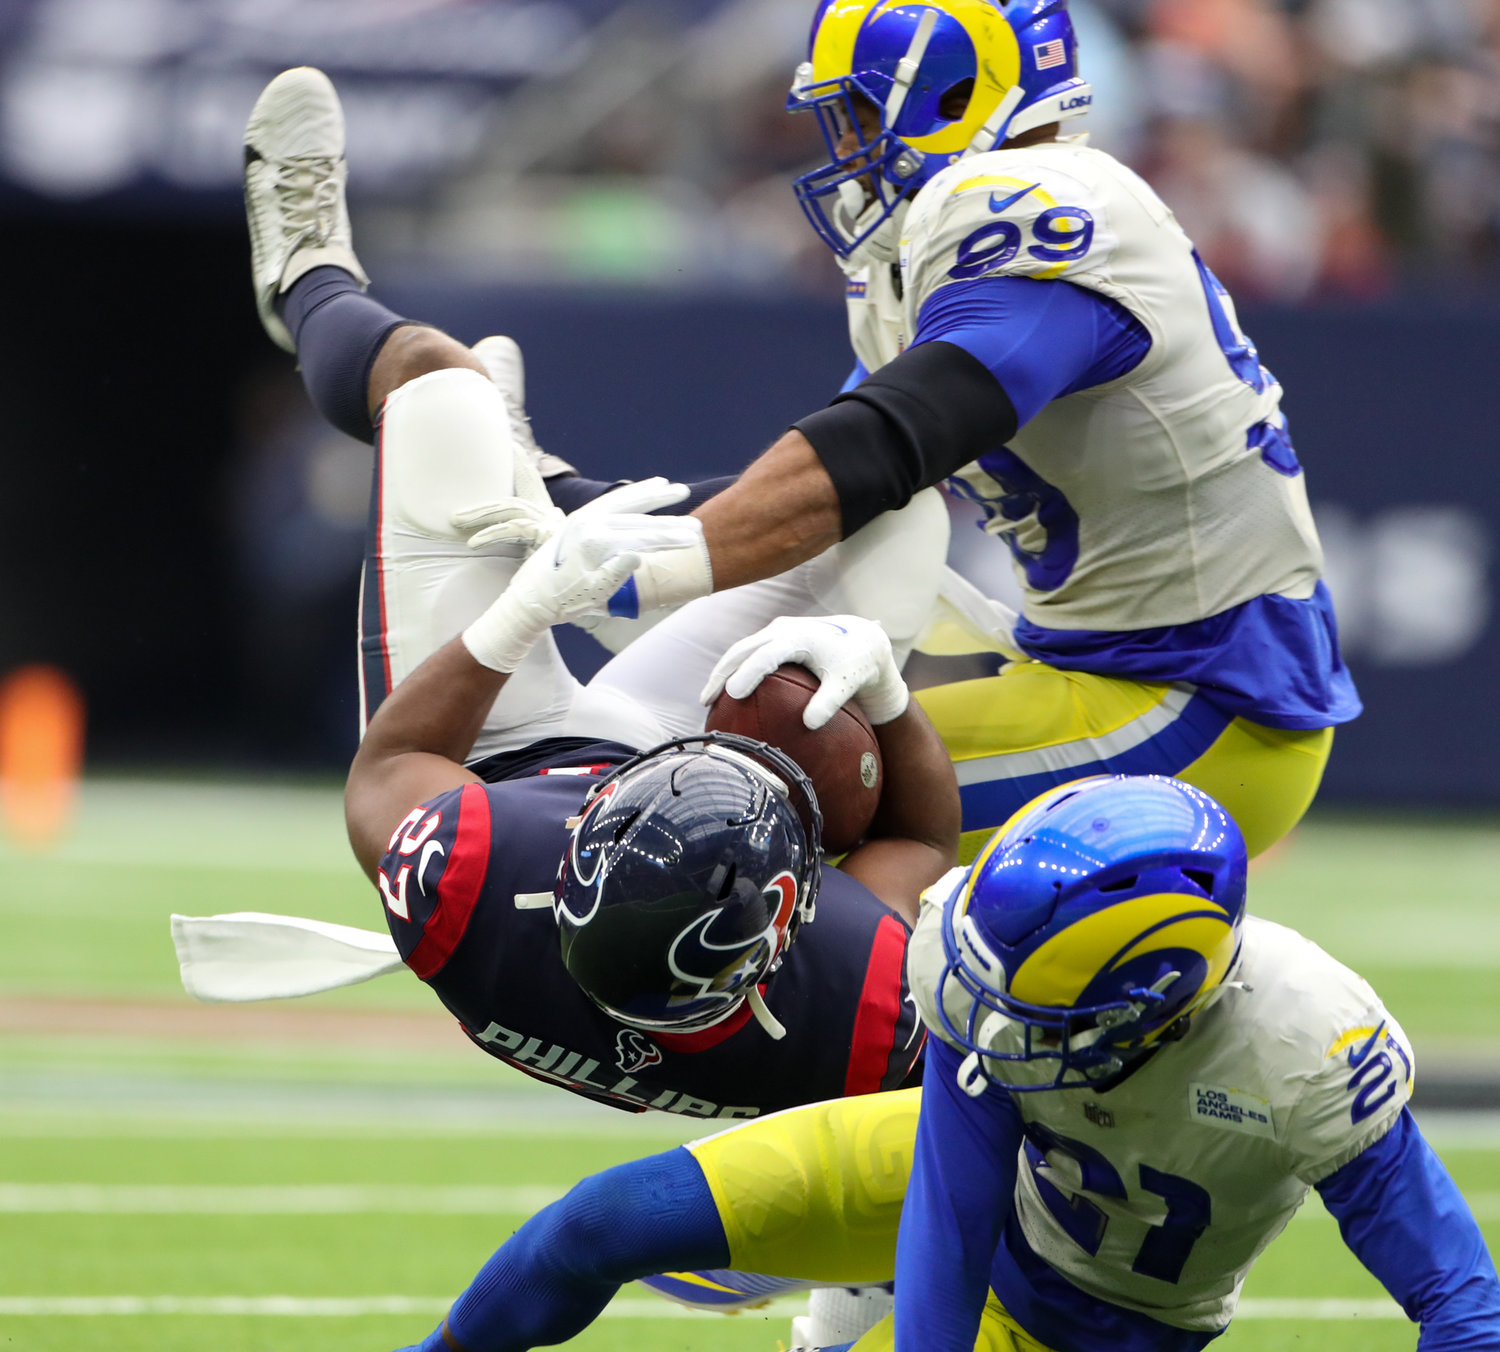 Los Angeles Rams defensive tackle Aaron Donald (99) and cornerback Dont'e Deayon (21) bring down Houston Texans running back Scottie Phillips (27) during an NFL game between Houston and the Los Angeles Rams on October 31, 2021 in Houston, Texas.